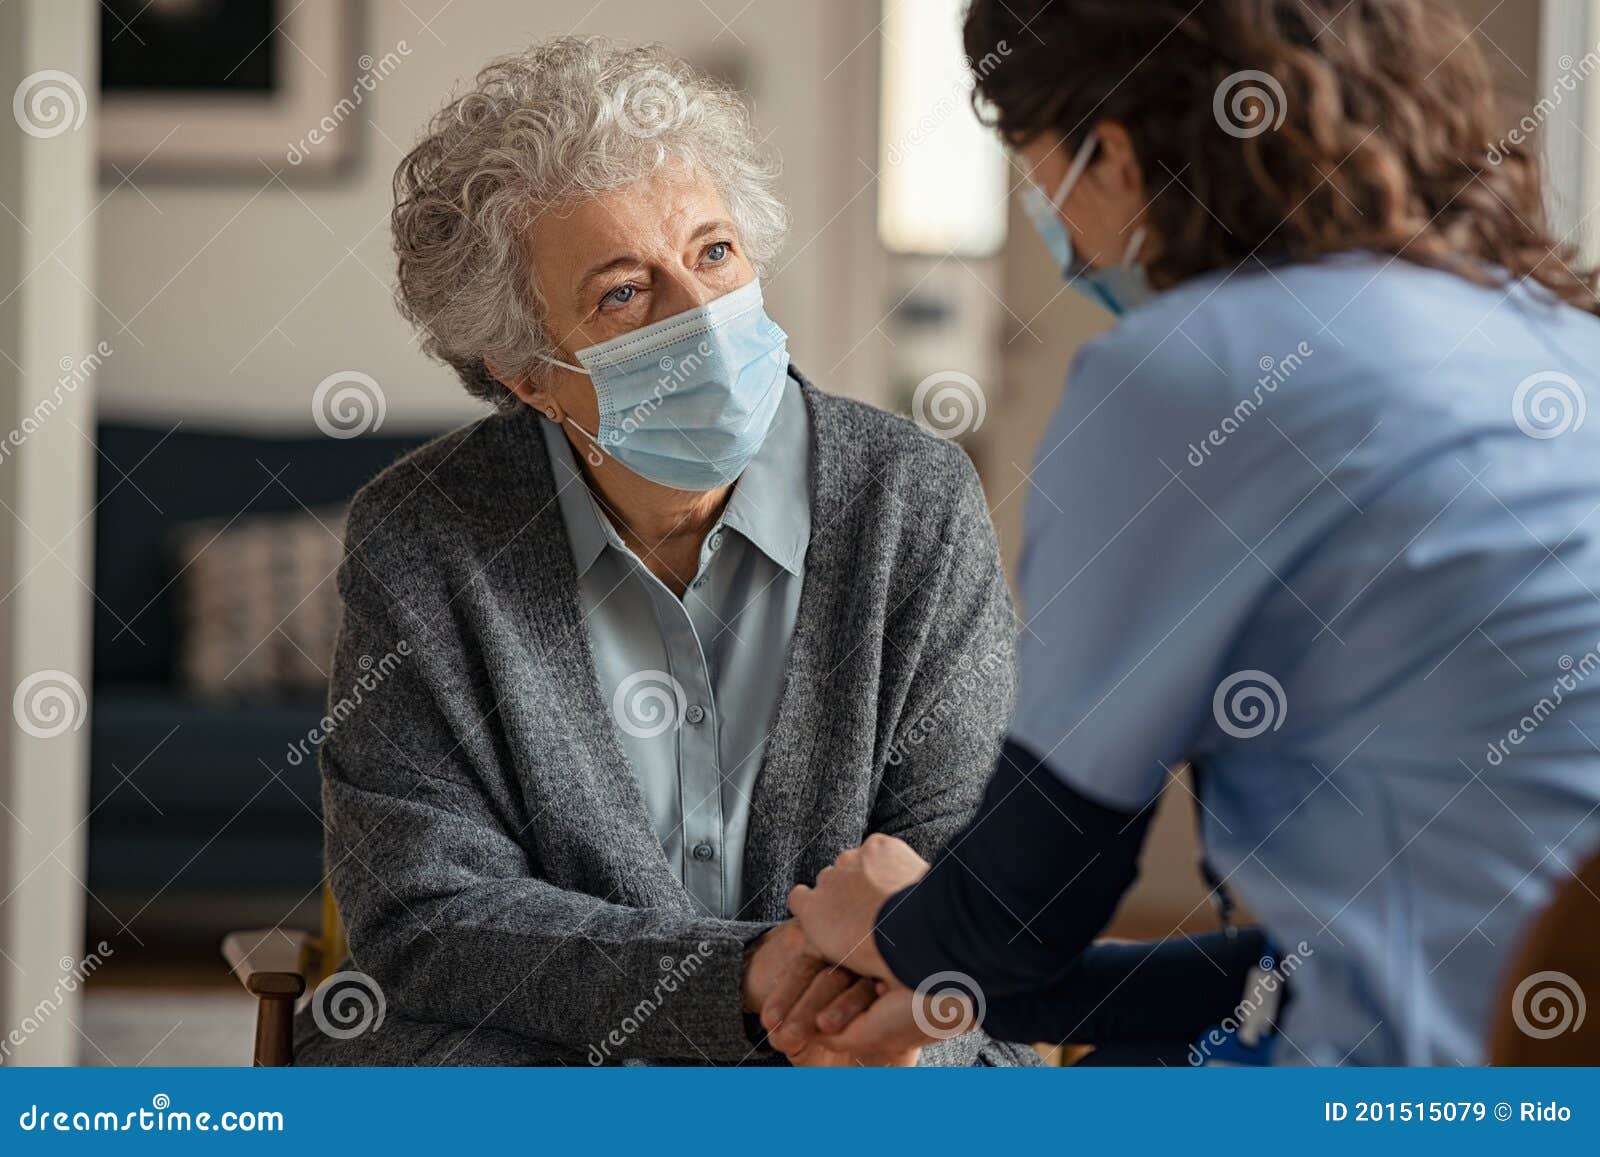 female doctor consoling senior woman wearing face mask during home visit